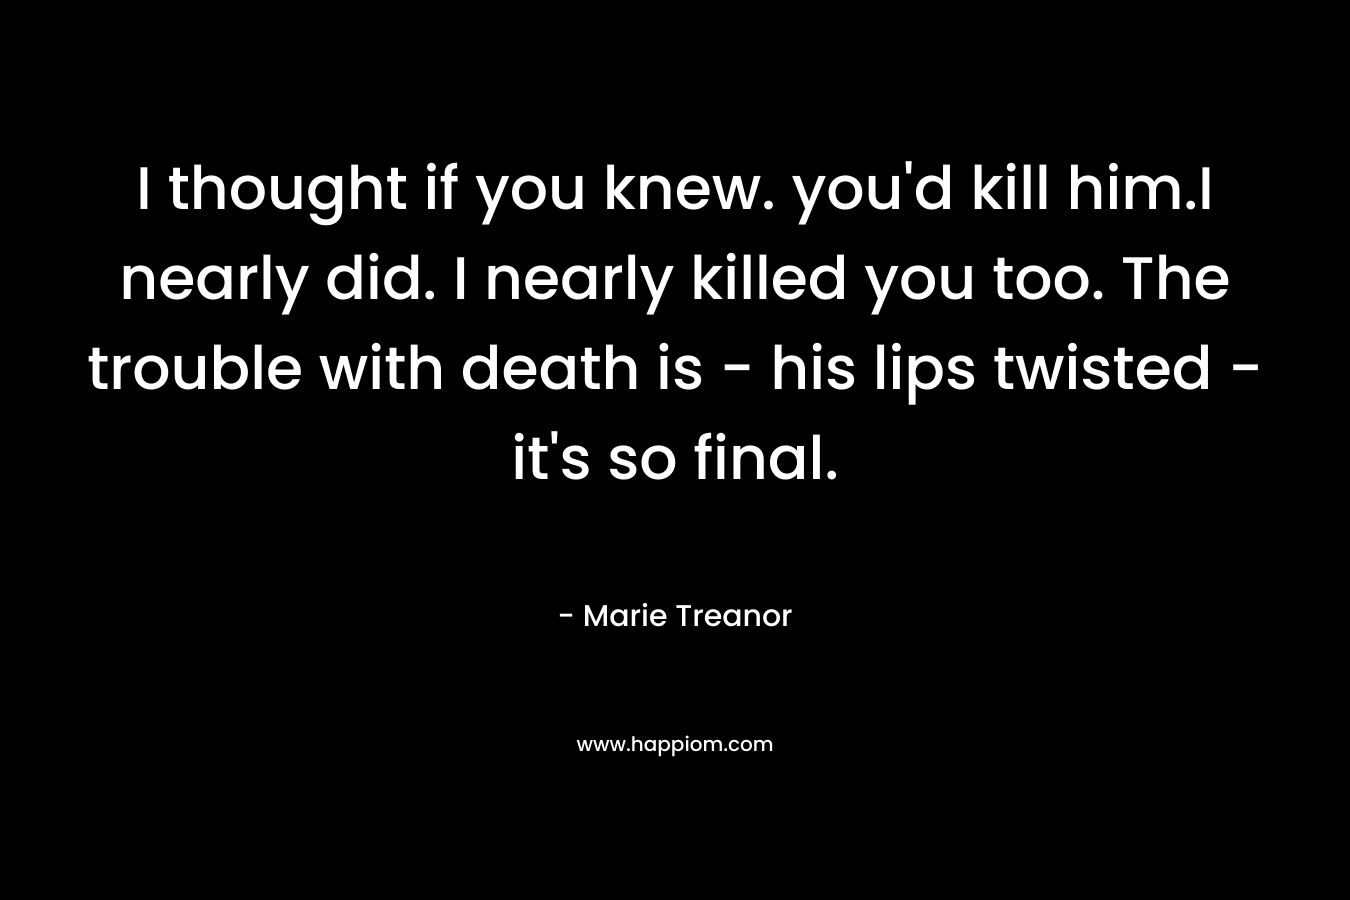 I thought if you knew. you'd kill him.I nearly did. I nearly killed you too. The trouble with death is - his lips twisted - it's so final.